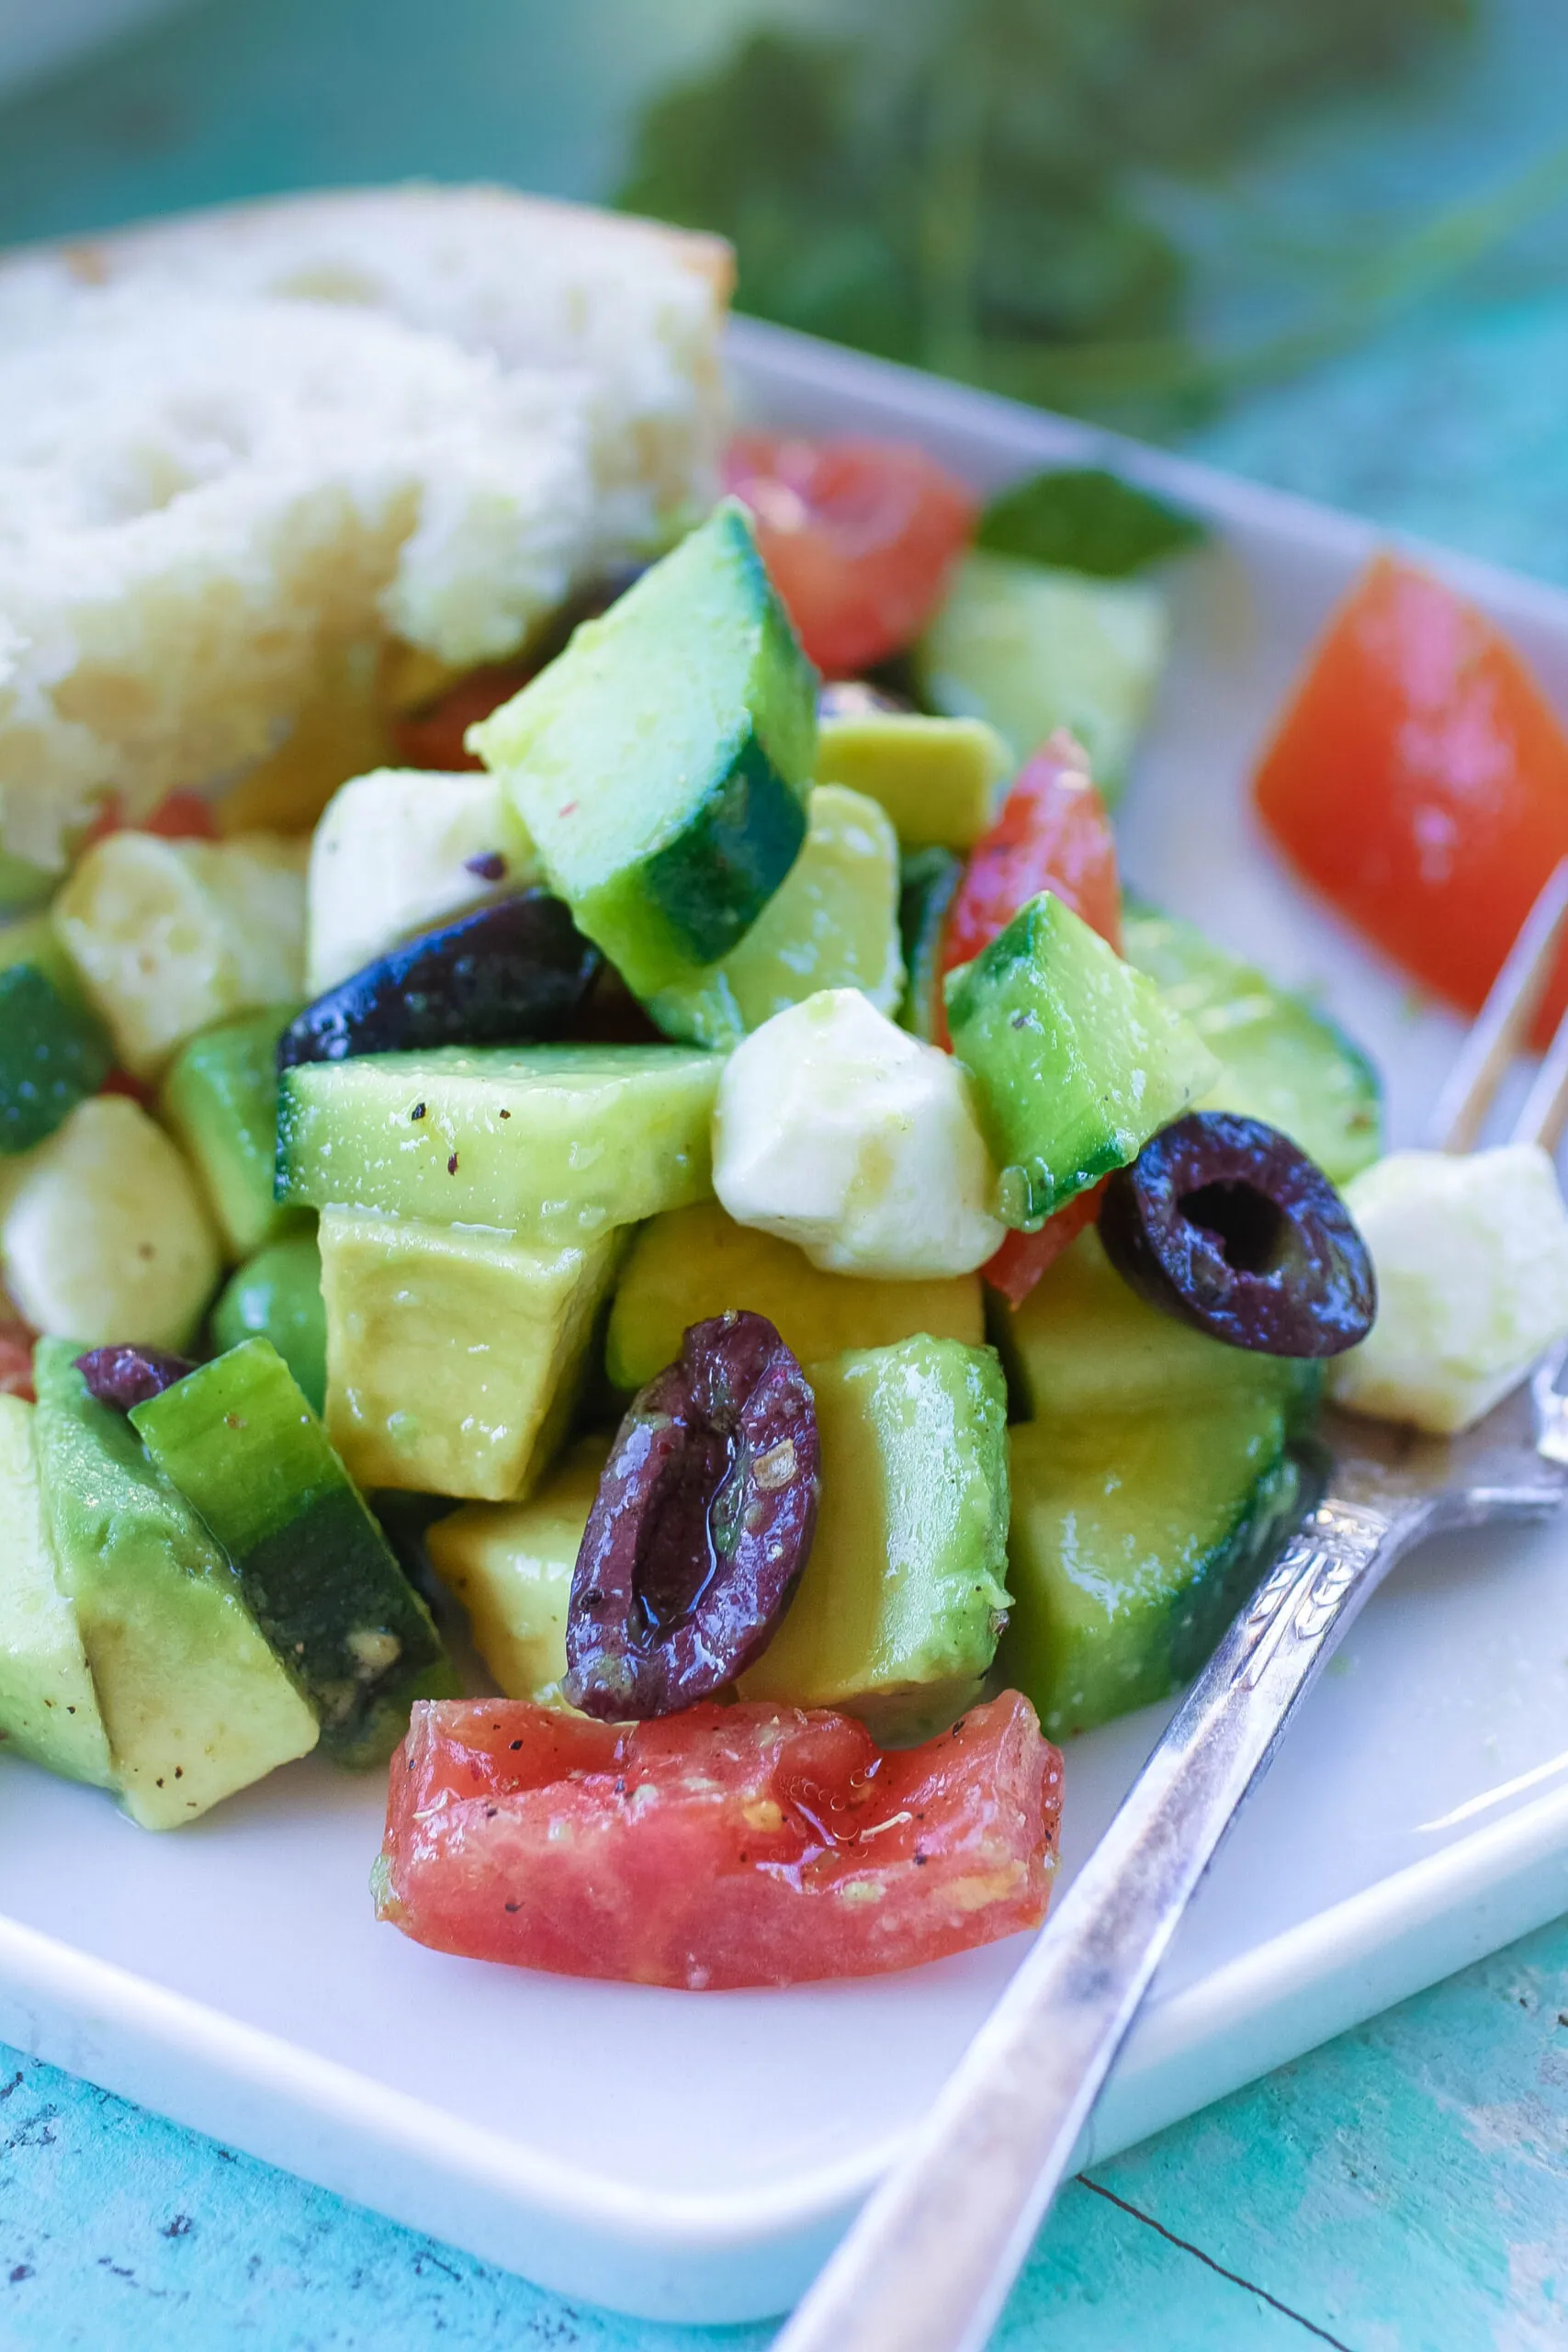 Cucumber salad with simple lemony dressing is an ideal dish to serve this summer!